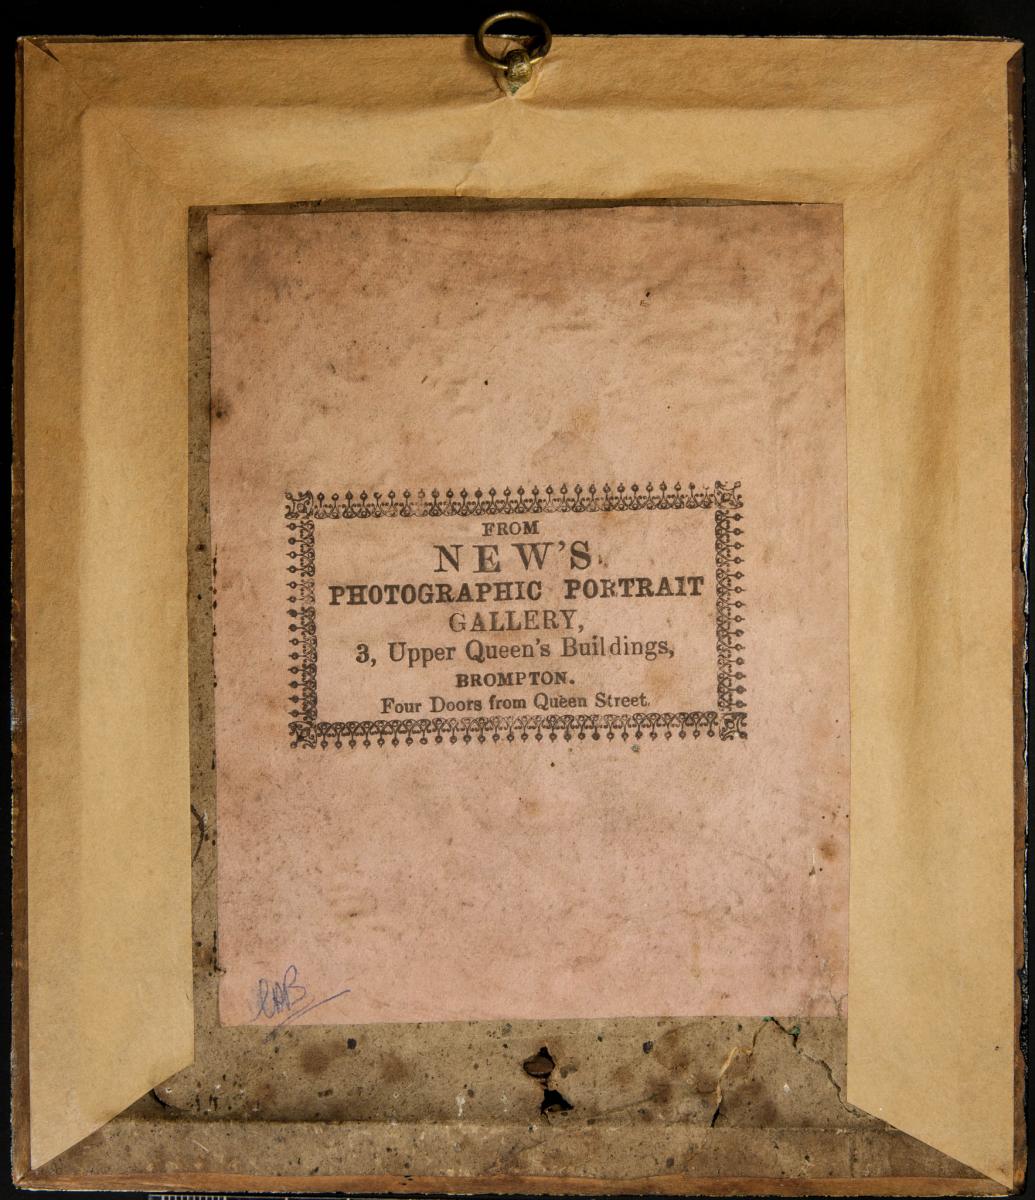 Reverse of continental style framed ambrotype by New's Photographic Portrait Gallery, Brompton, c. 1860